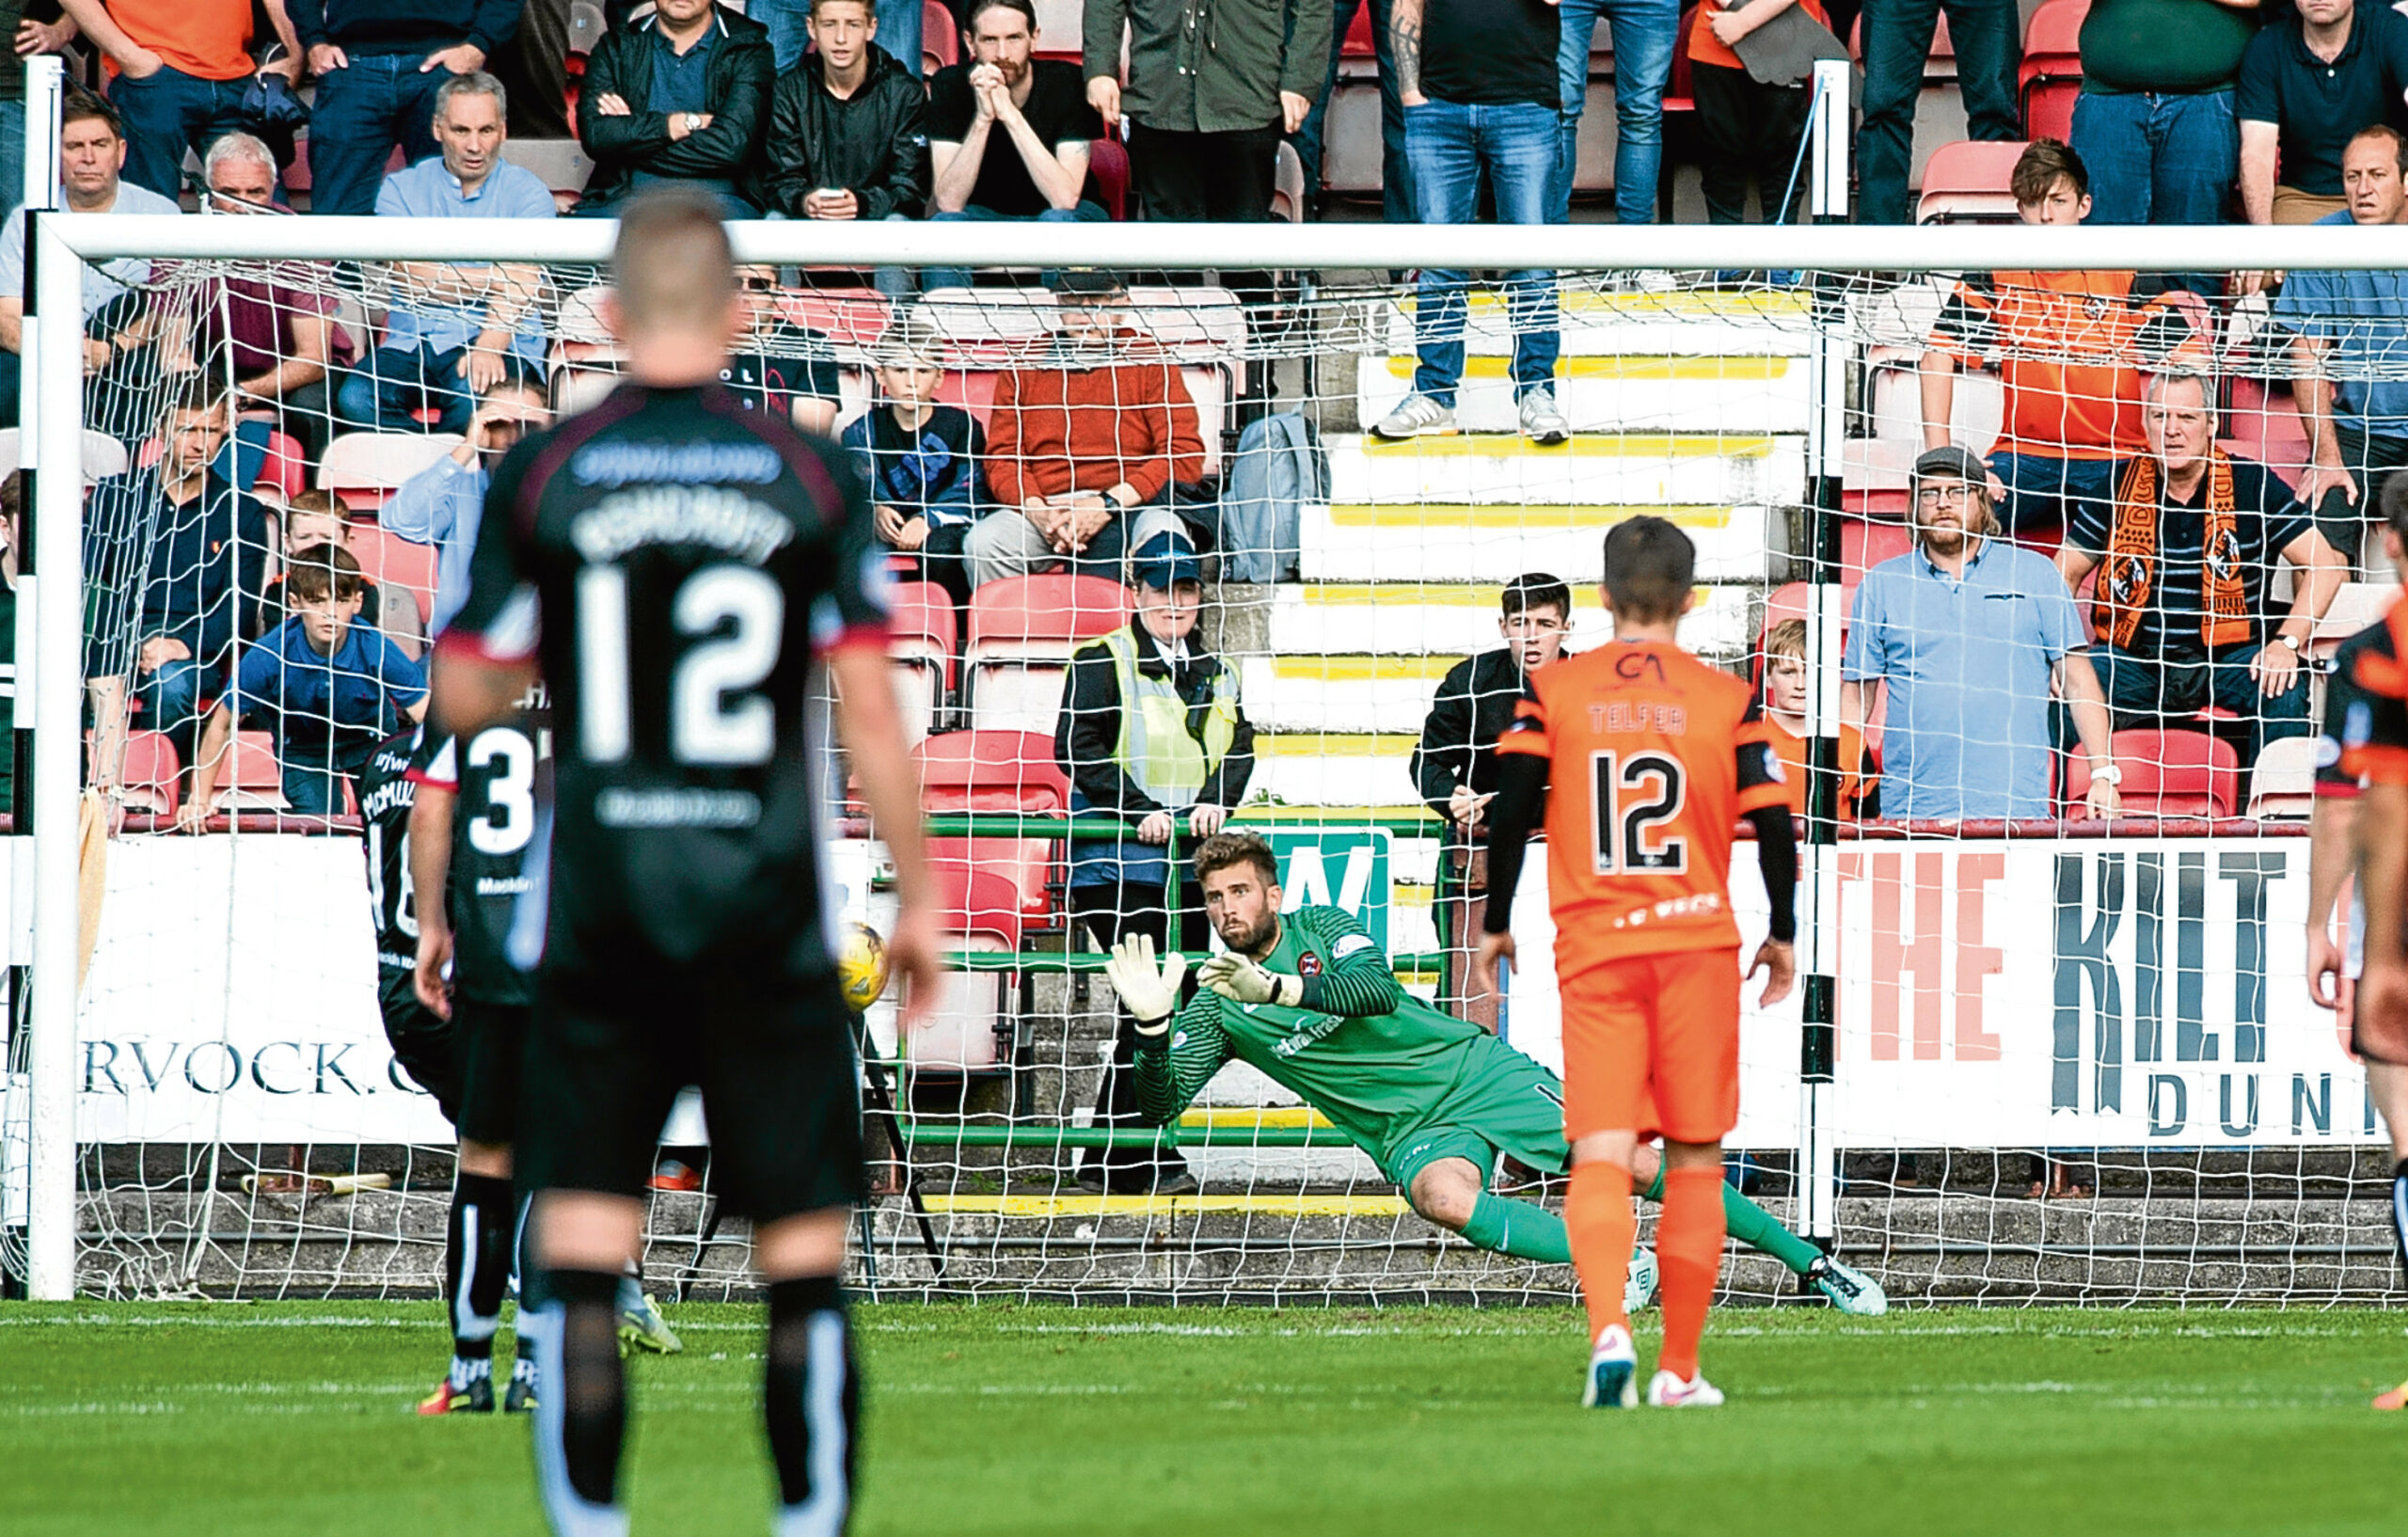 10/09/16 LADBROKES CHAMPIONSHIP DUNFERMLINE v DUNDEE UNITED (1-3) EAST END PARK - DUNFERMLINE Dundee United goalkeeper Cammy Bell saves his third penalty of the match